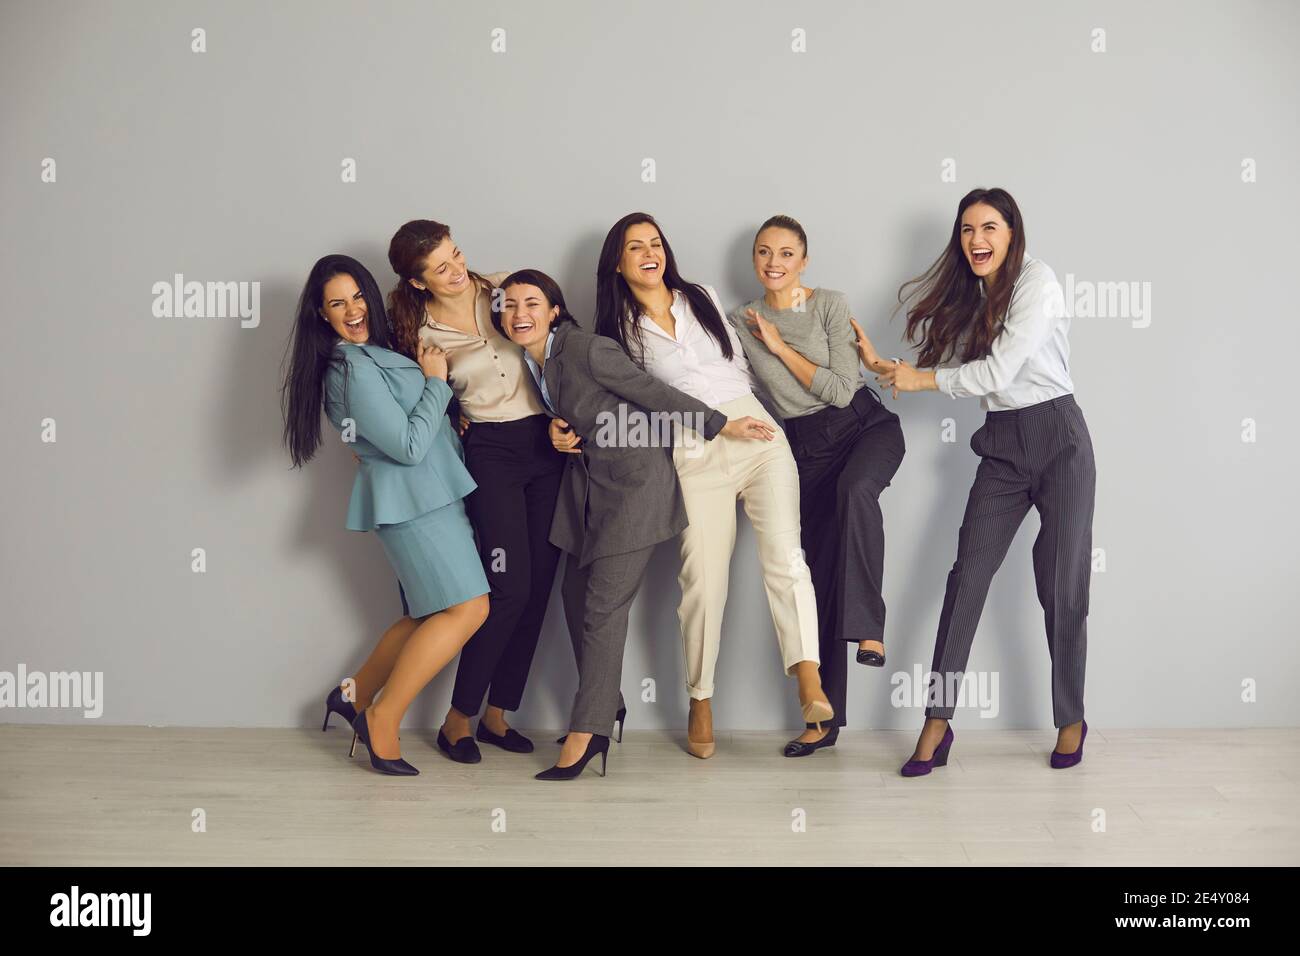 Team of excited young business women having fun and celebrating success together Stock Photo